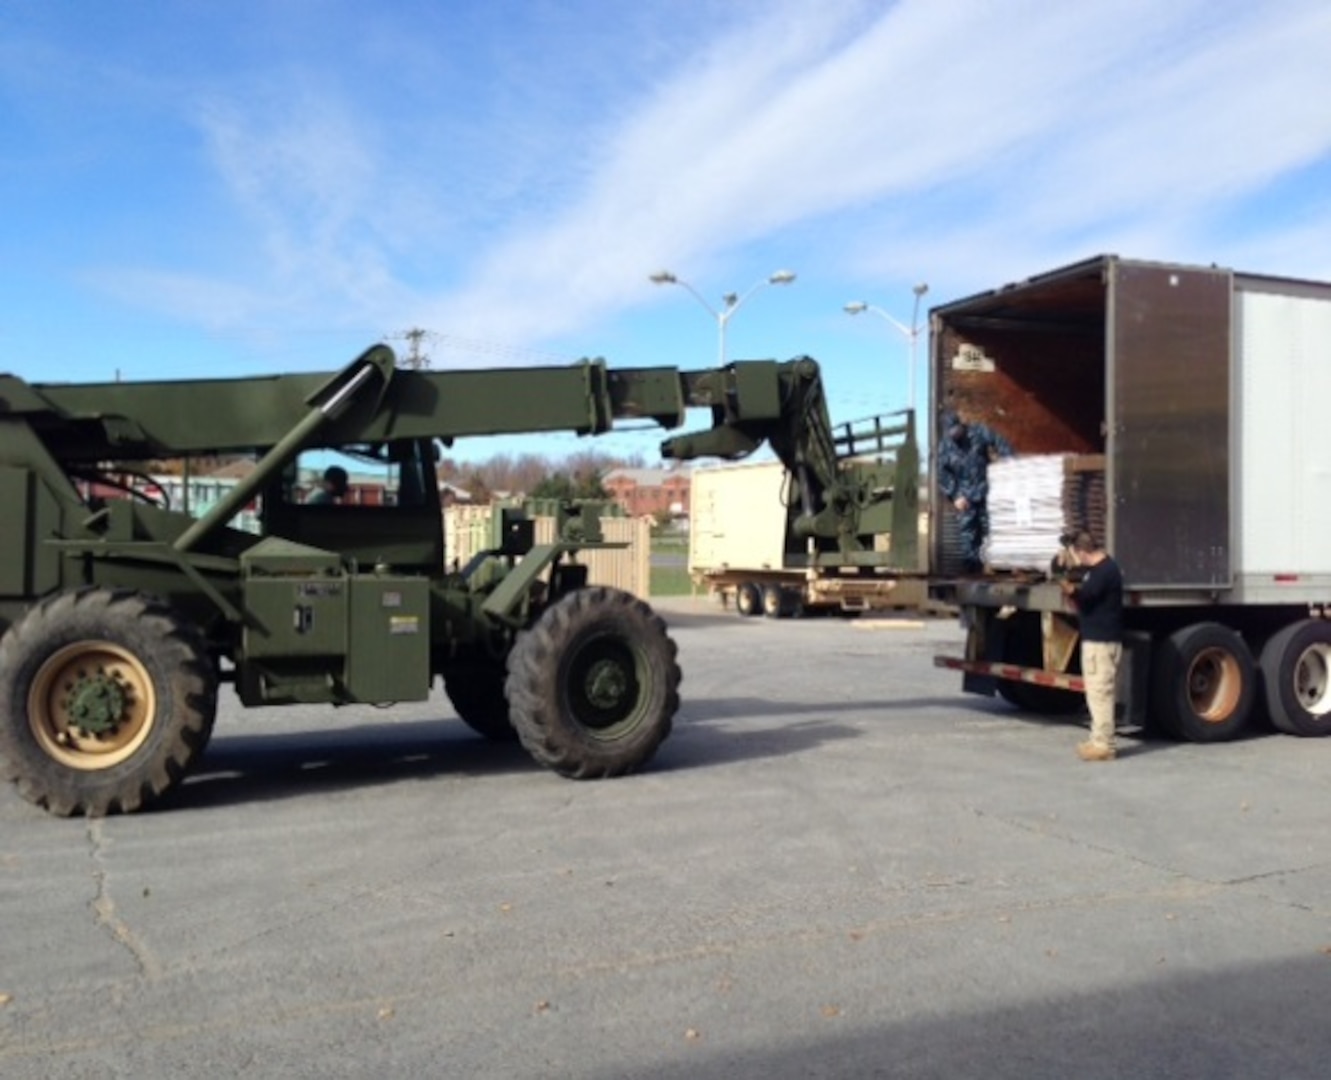 The Defense Logistics Agency Distribution Expeditionary team completes their seventh mission in support of HQDA EXORD 119-14 BCT Reorganization/490 Excess Equipment Drawdown at Ft. Bragg, N.C.